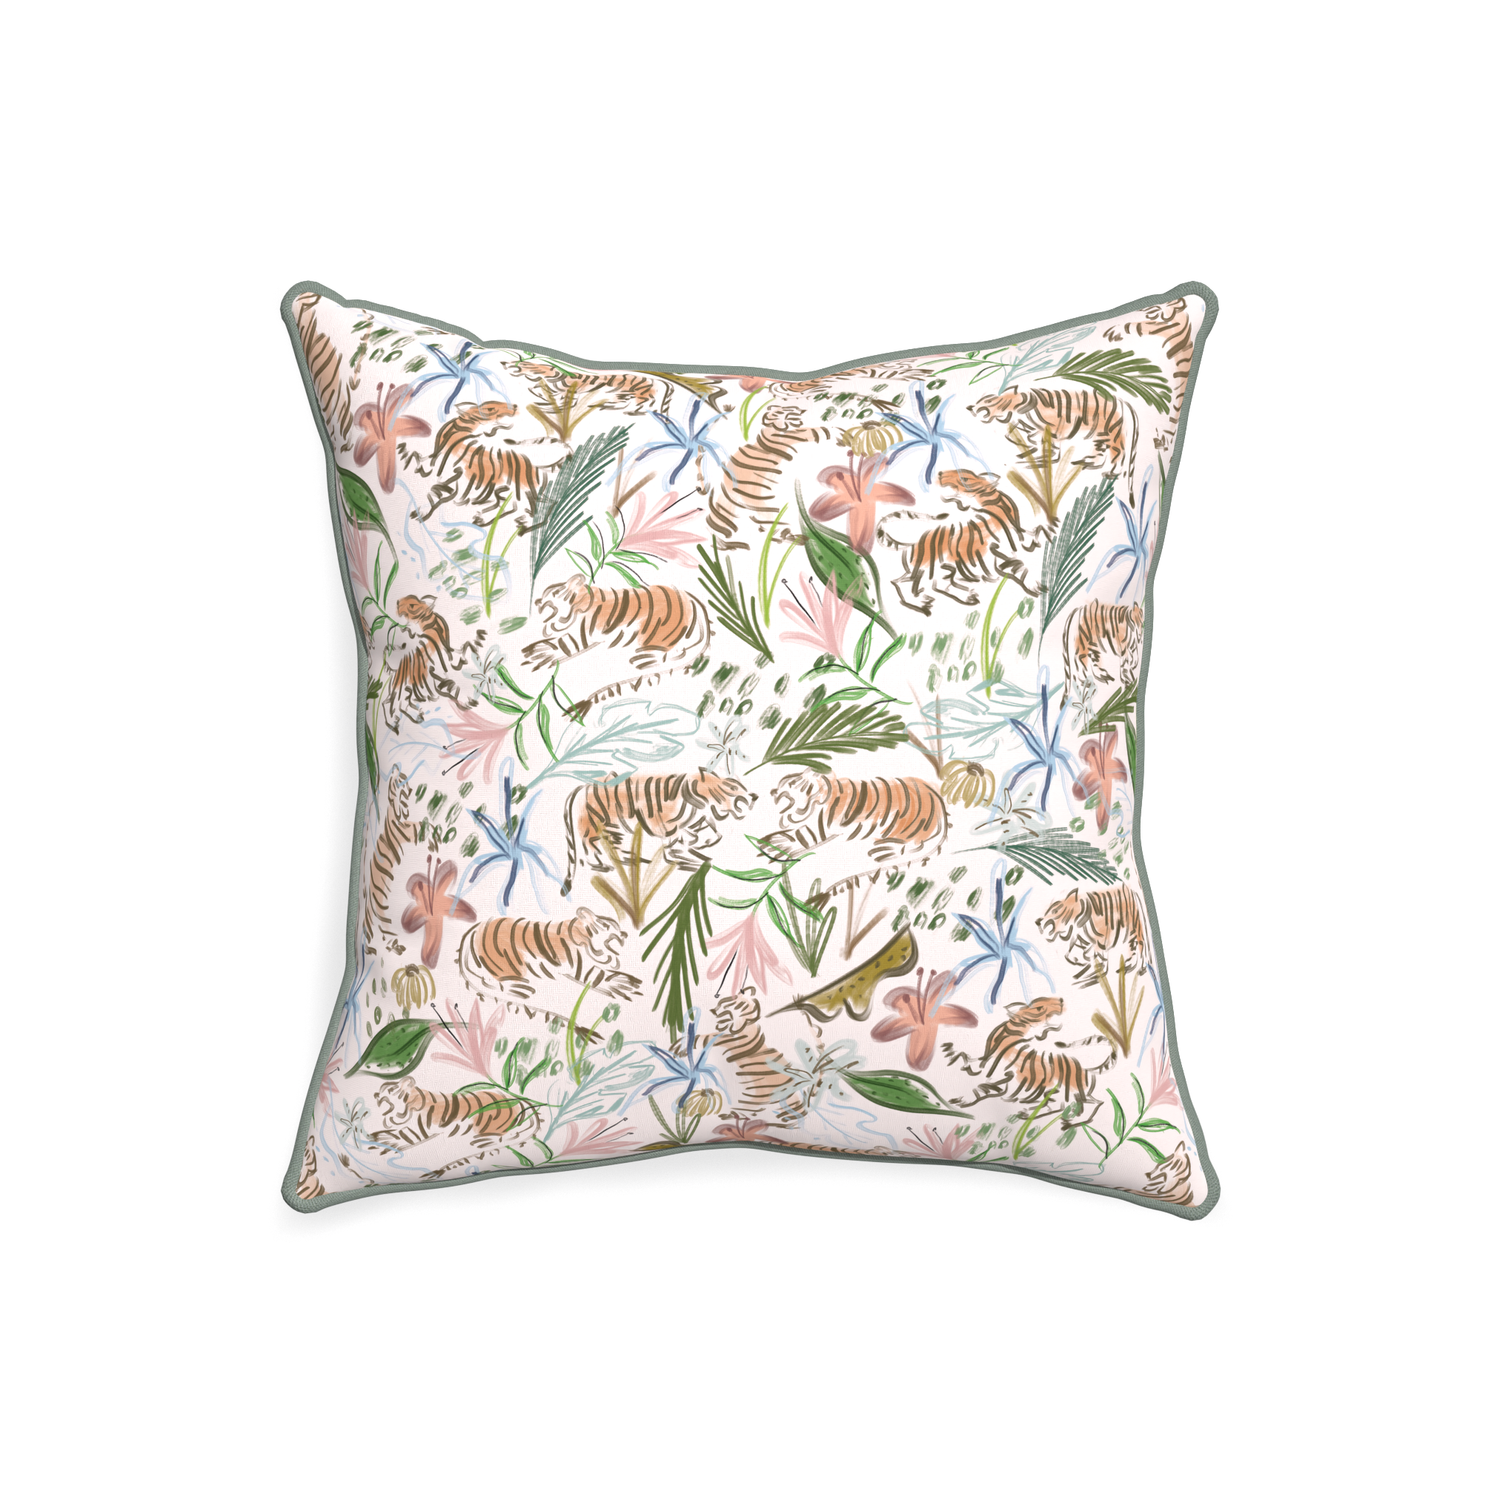 20-square frida pink custom pink chinoiserie tigerpillow with sage piping on white background